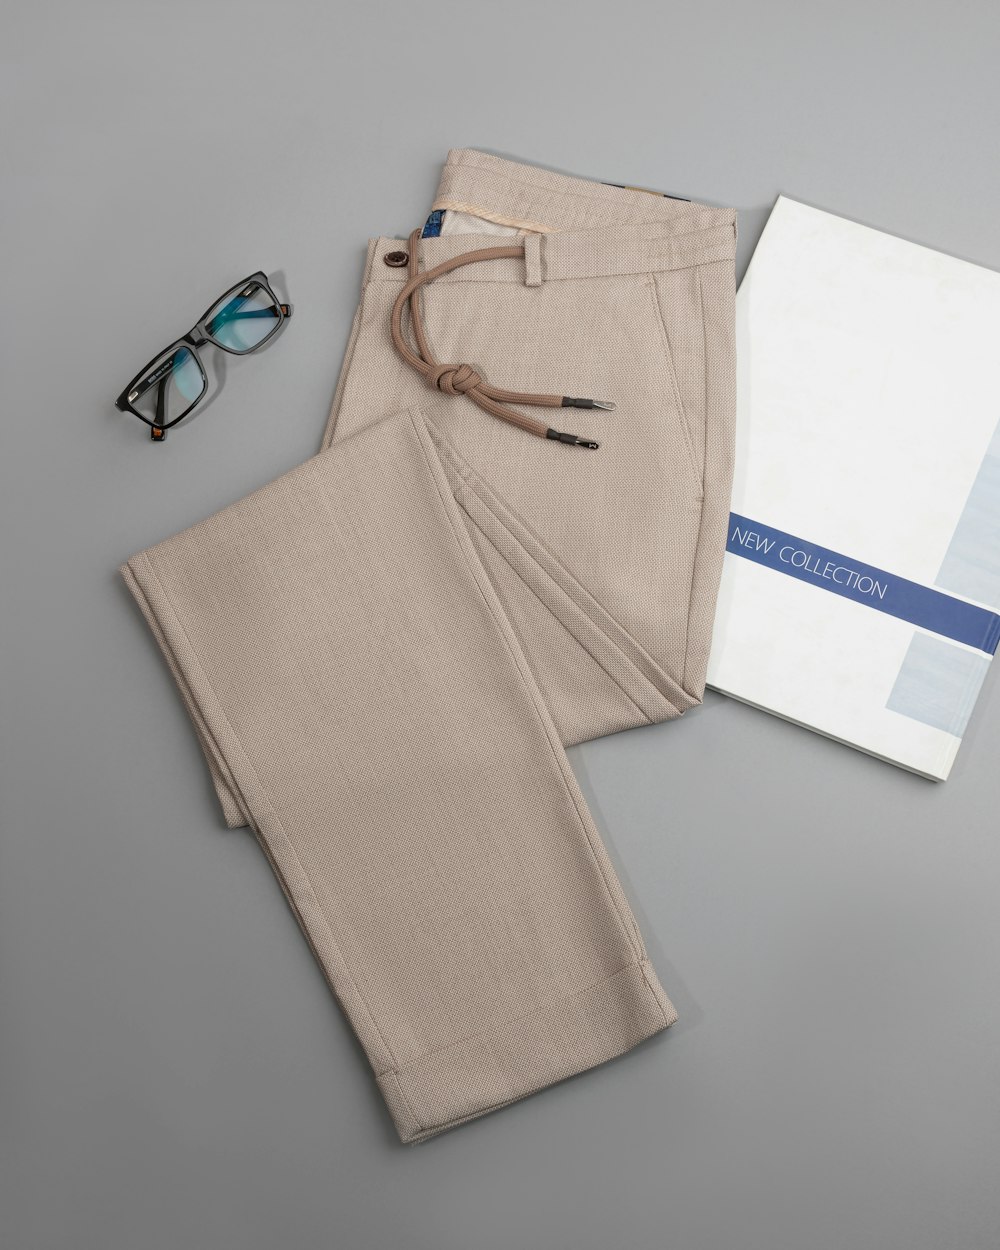 a pair of glasses, a book, and a pair of pants on a table